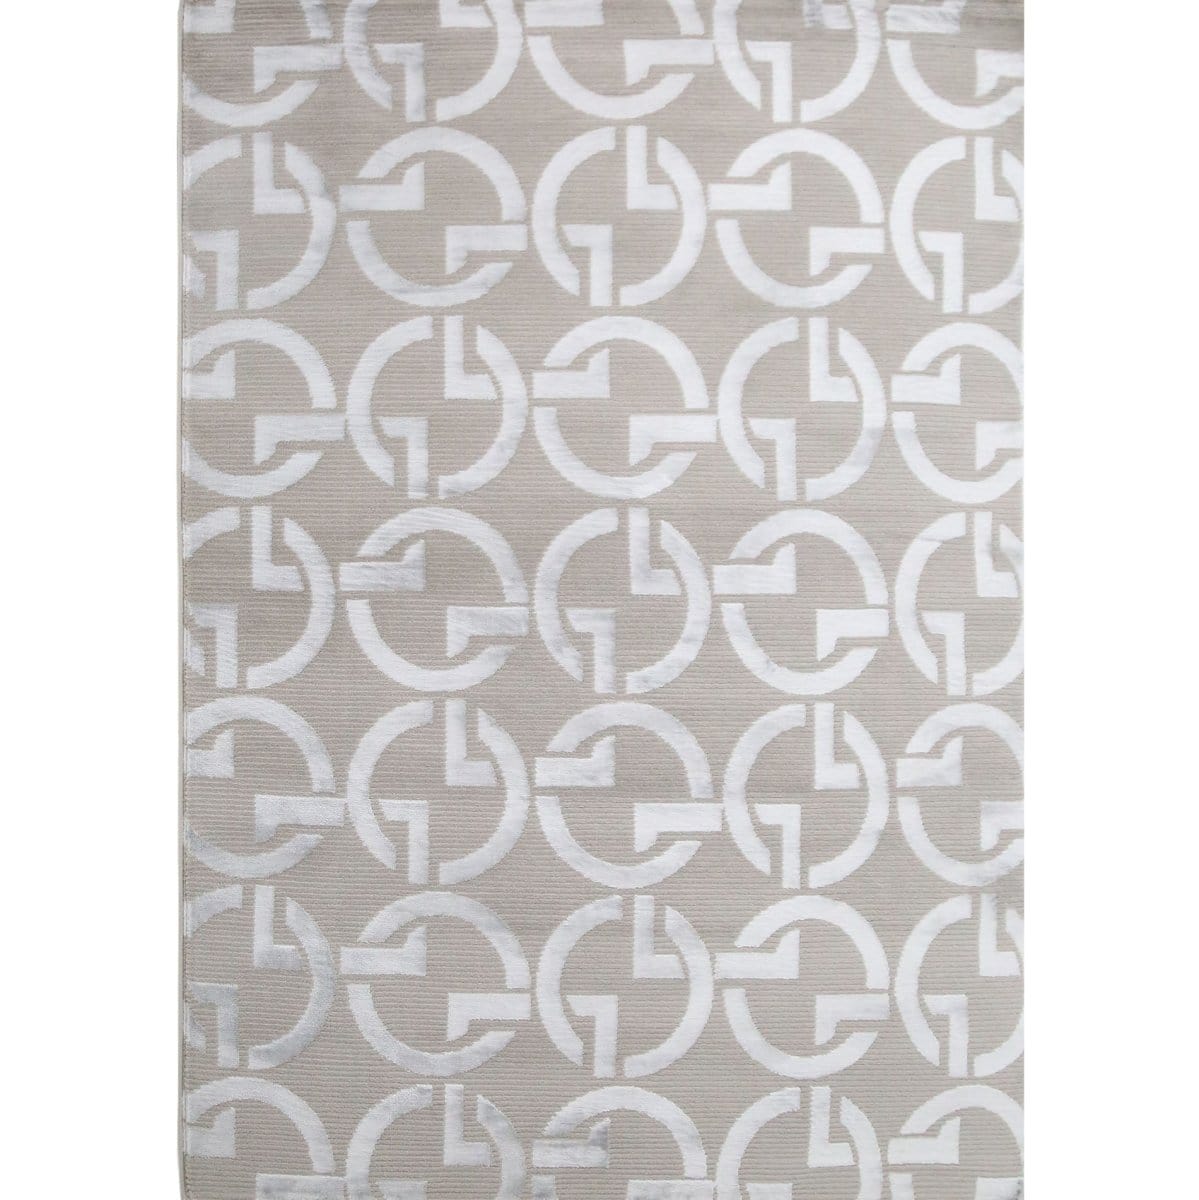 New York Carpet Collection (160*230cm) picket and rail